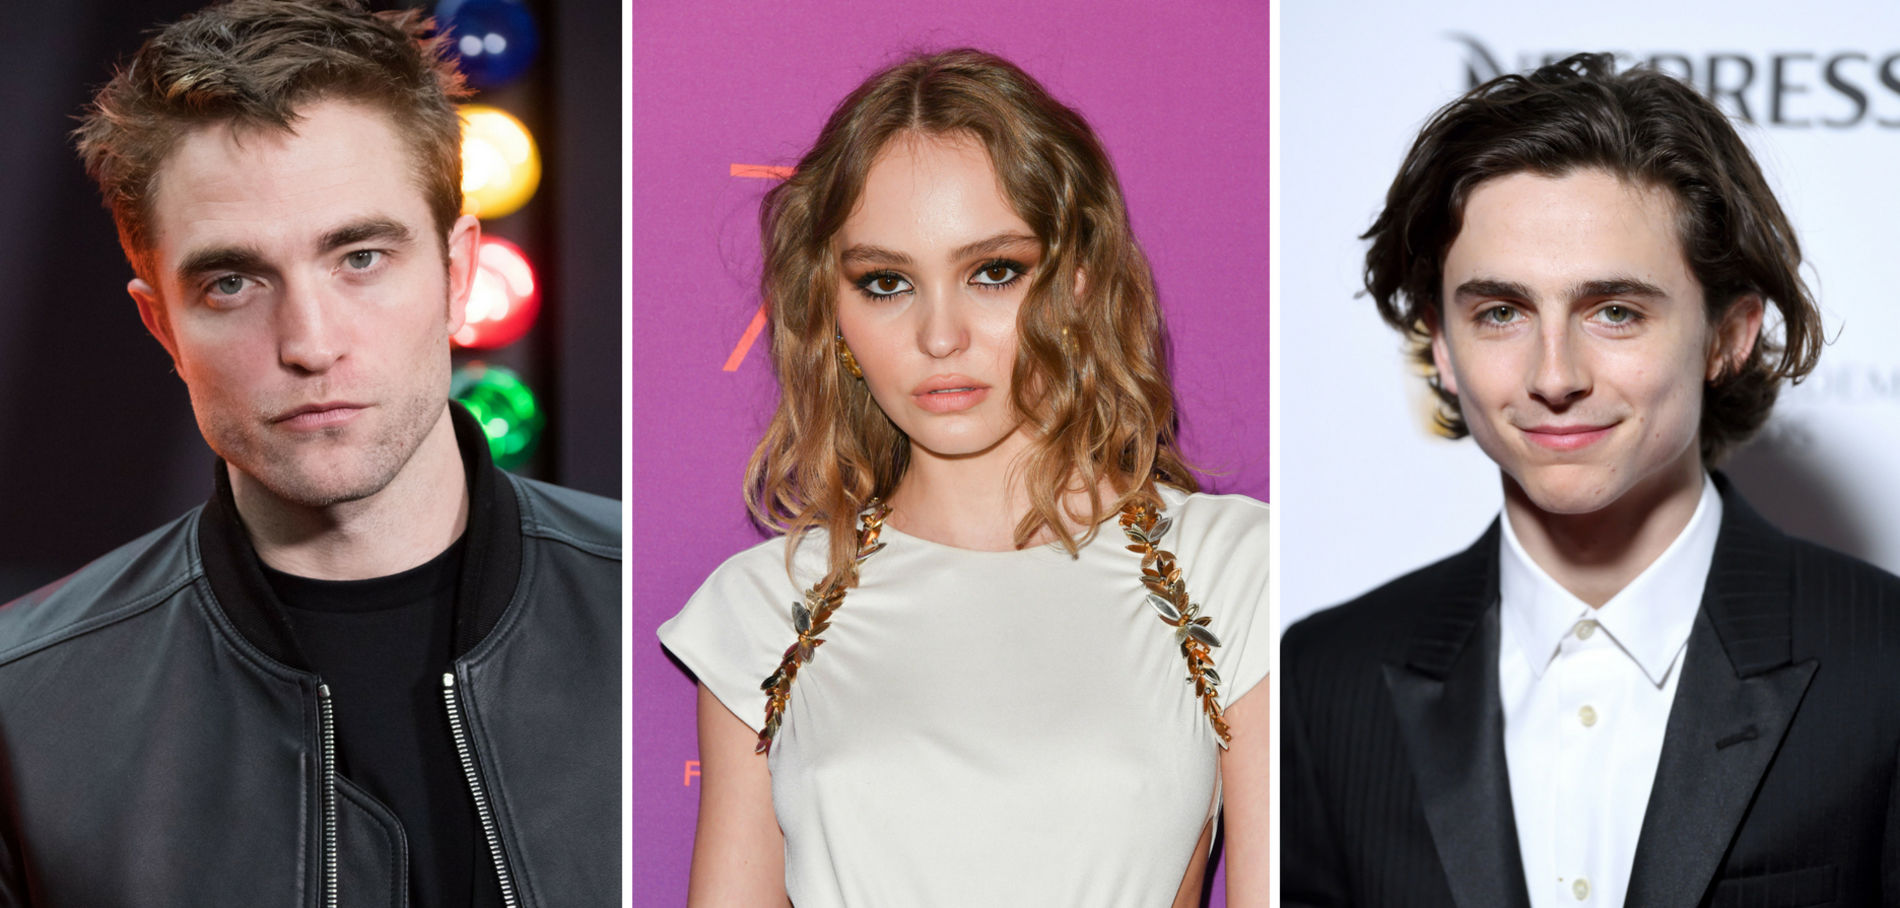 Robert Pattinson And Lily Rose Depp Joins Cast Of Netflix S The King Film News Conversations About Her